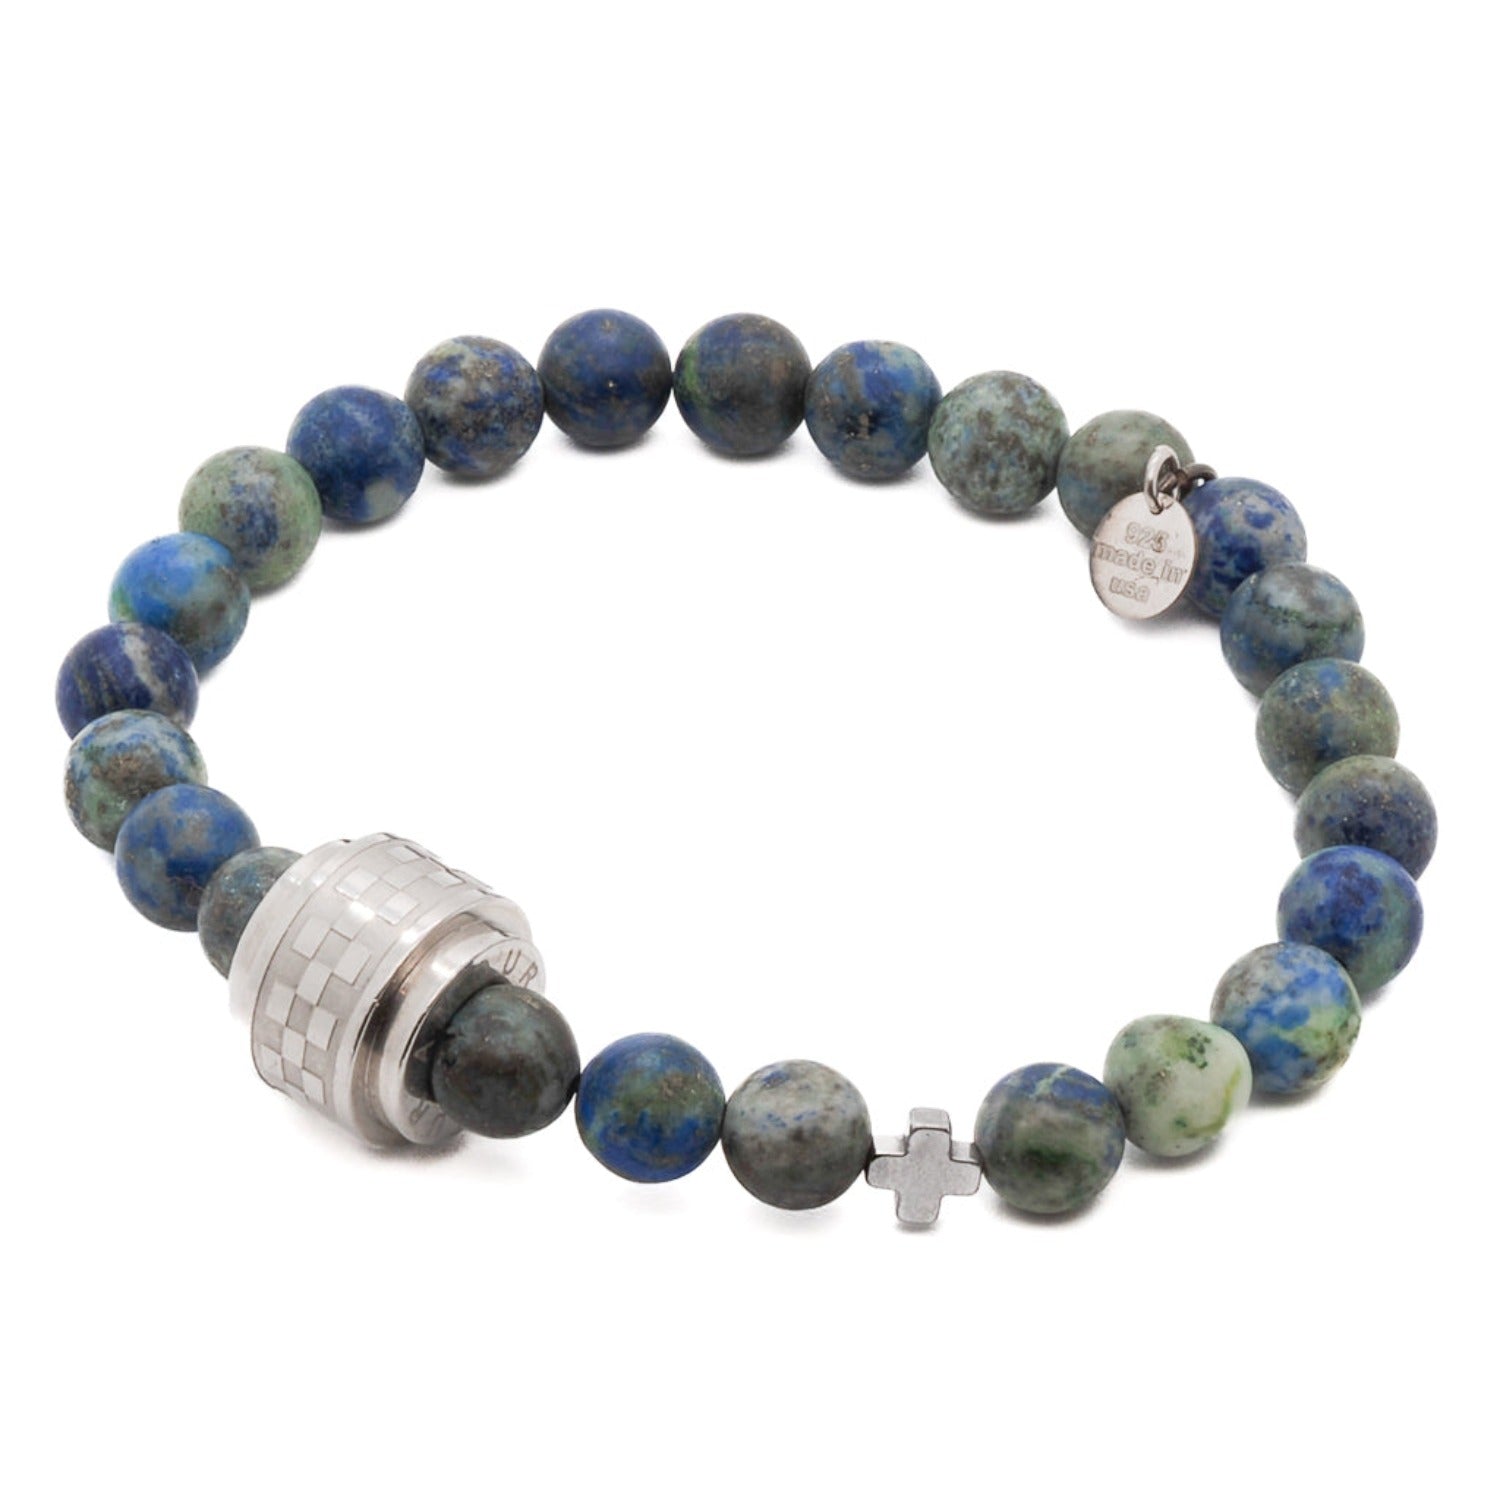 Mystical Beauty - Matte Azurite Stone Bracelet with Silver Accents.